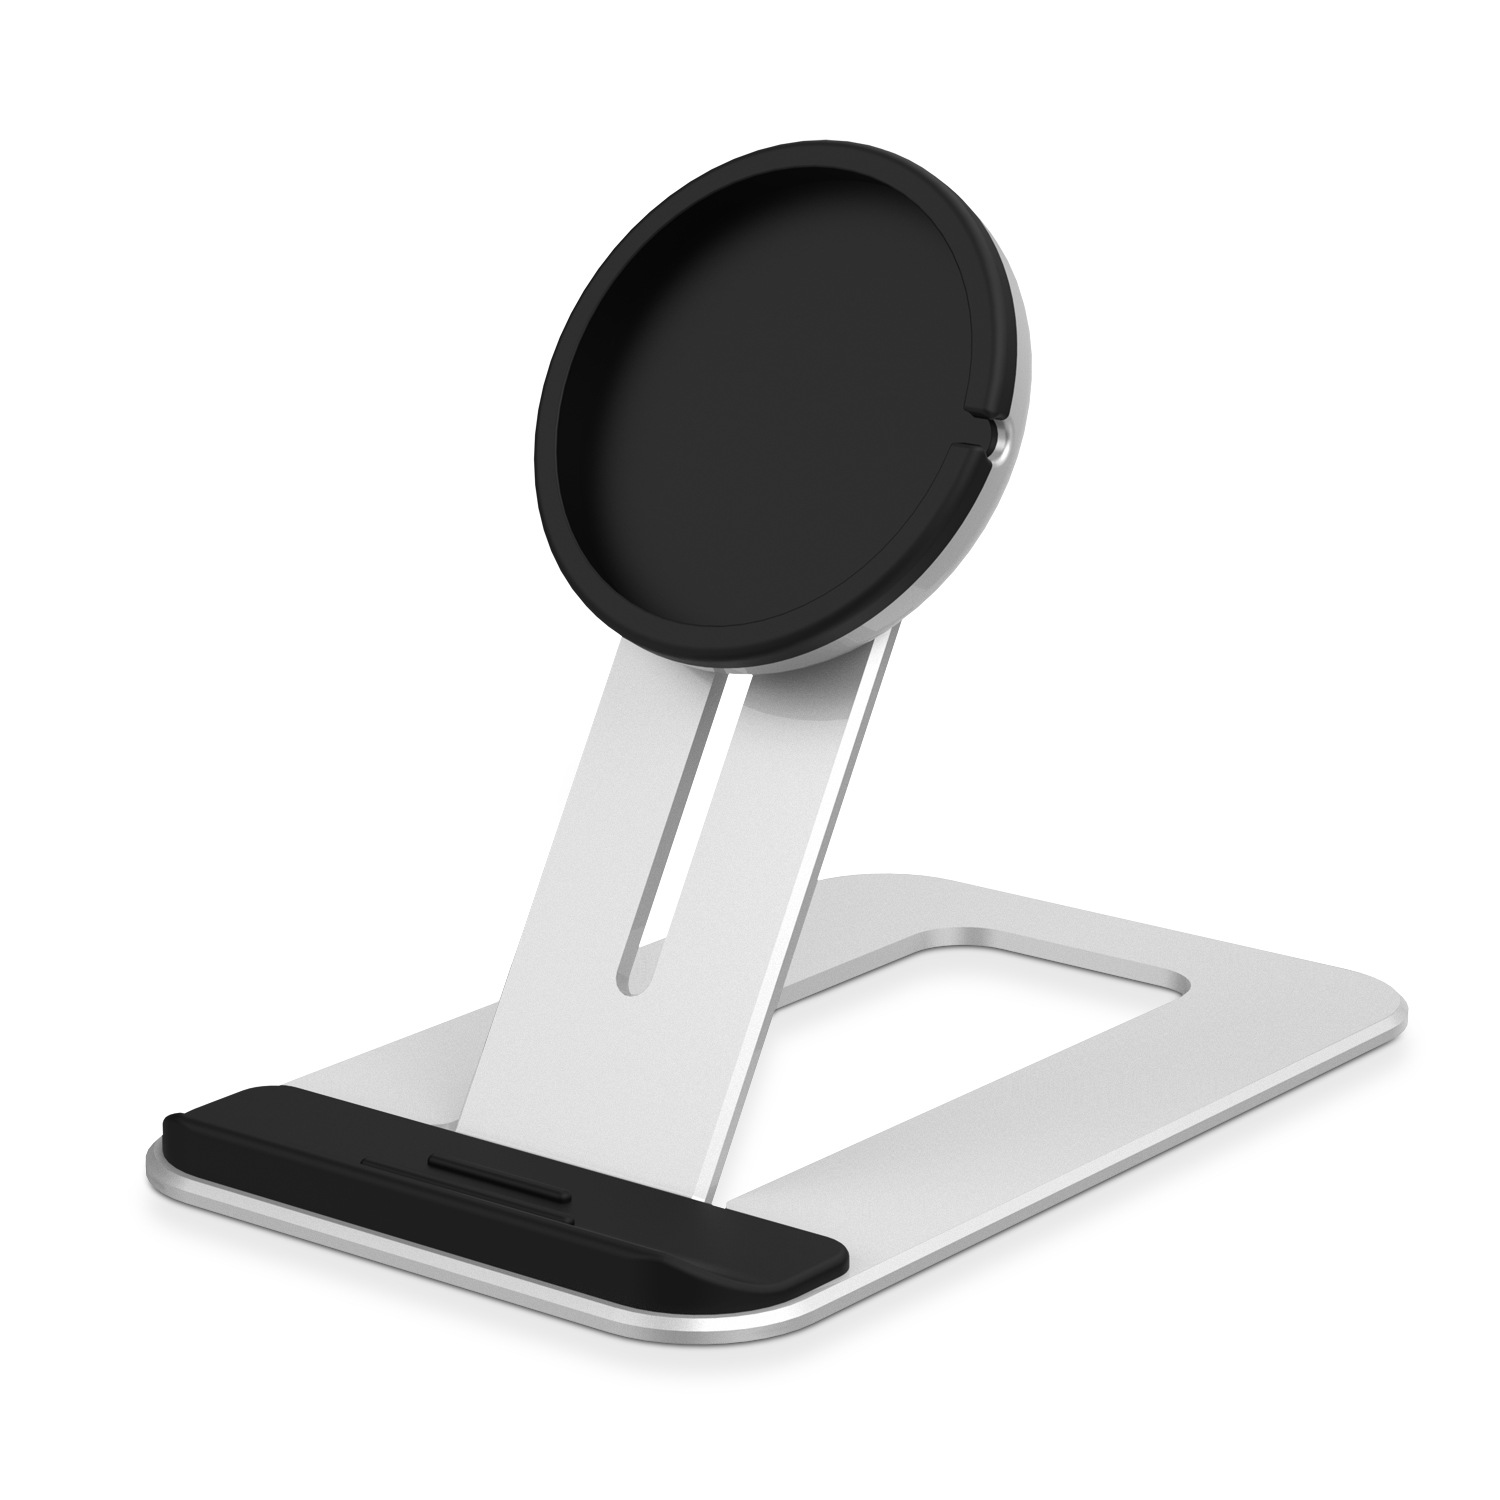 Bakeey Universal Adjustable Height of MagSafe Wireless Charger Base Mount Aluminium Alloy Desktop Holder for iPhone 12 Series